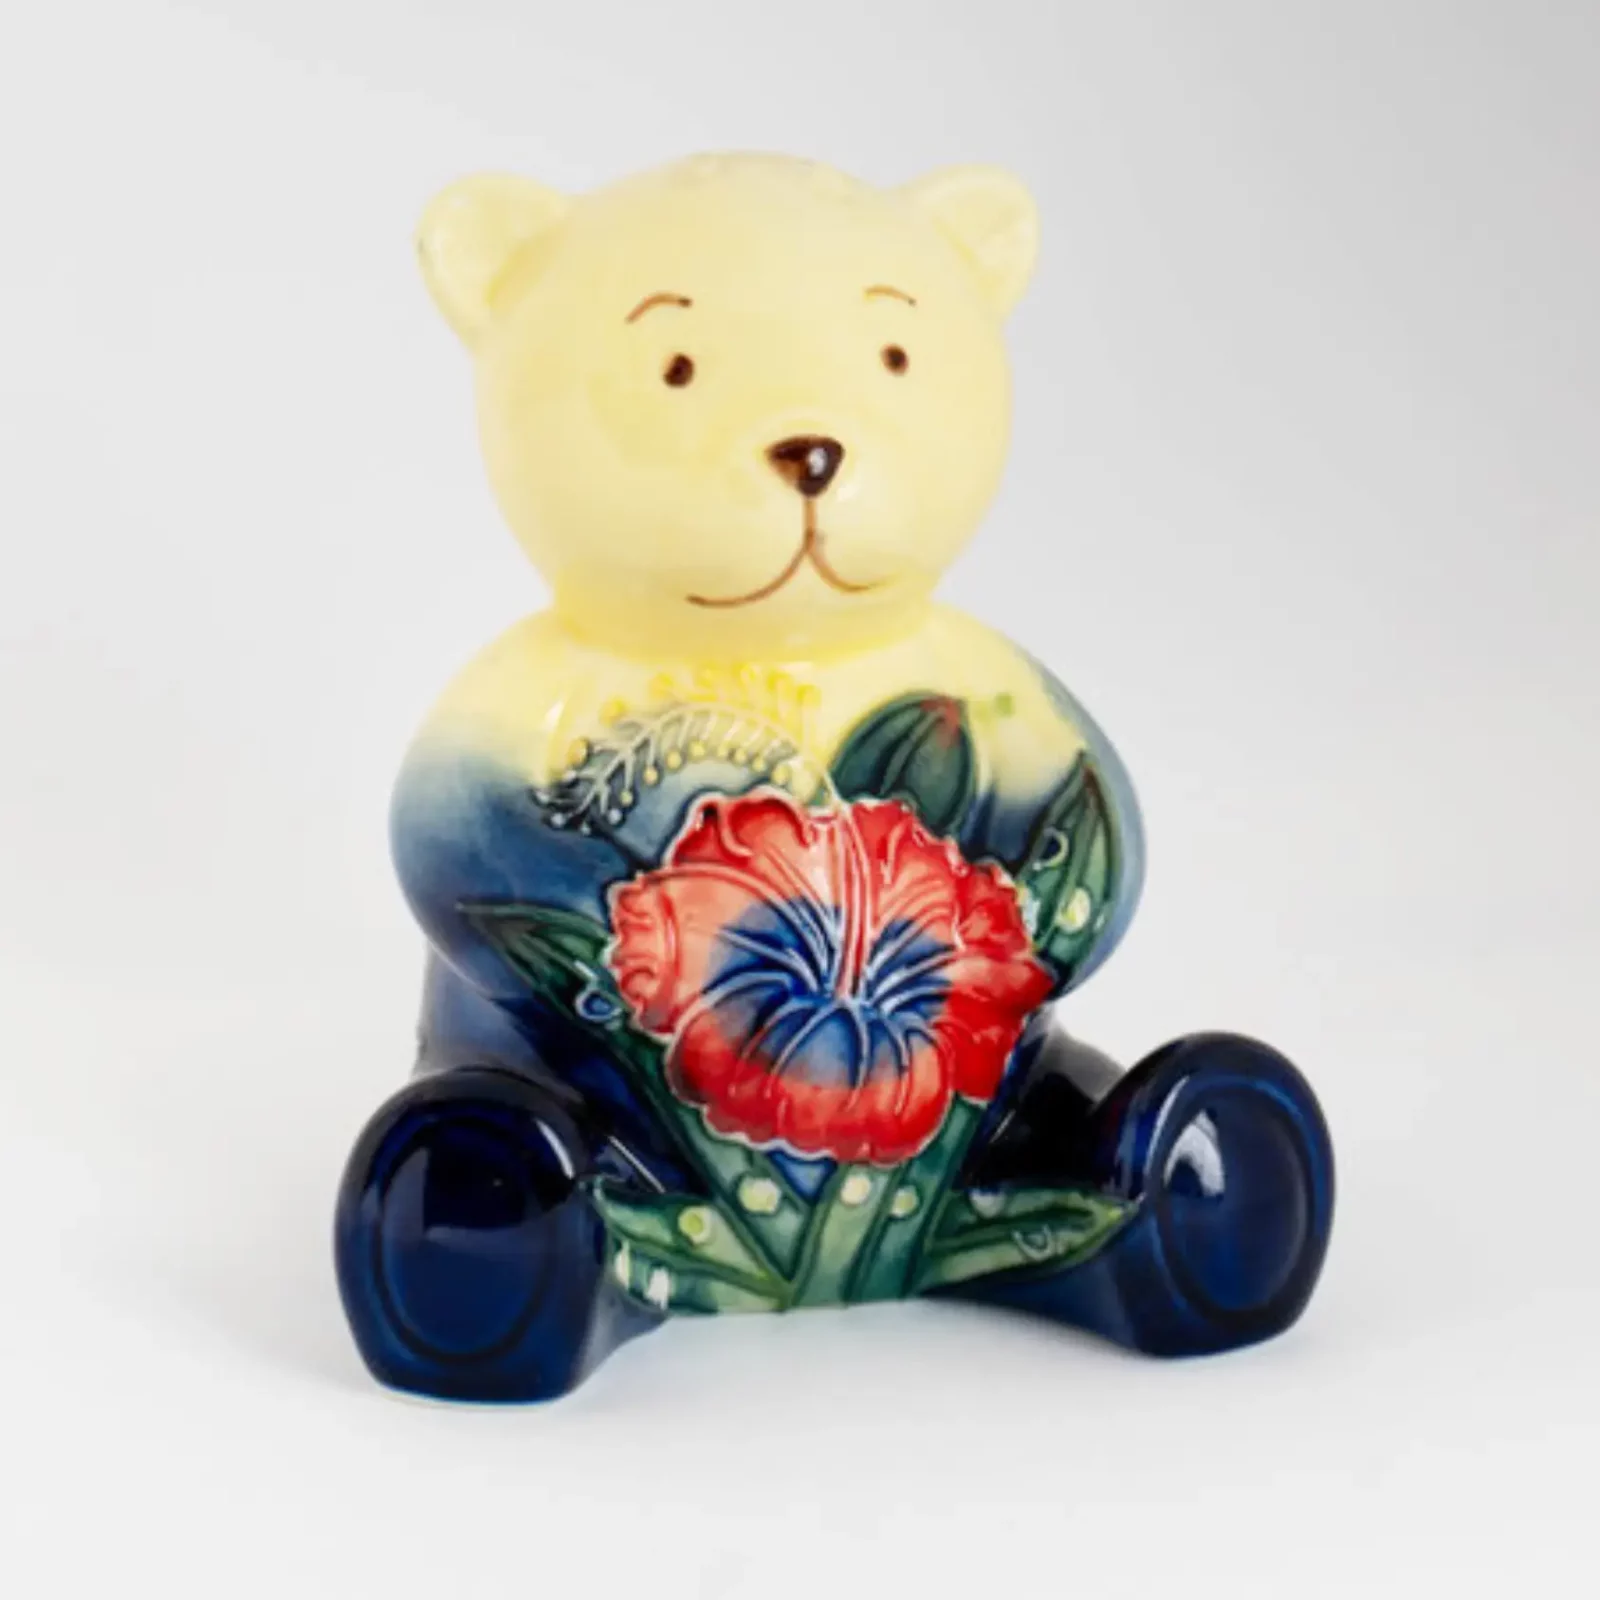 bear ornament cream colour with navy blue and bold red hibiscus flower hand painted